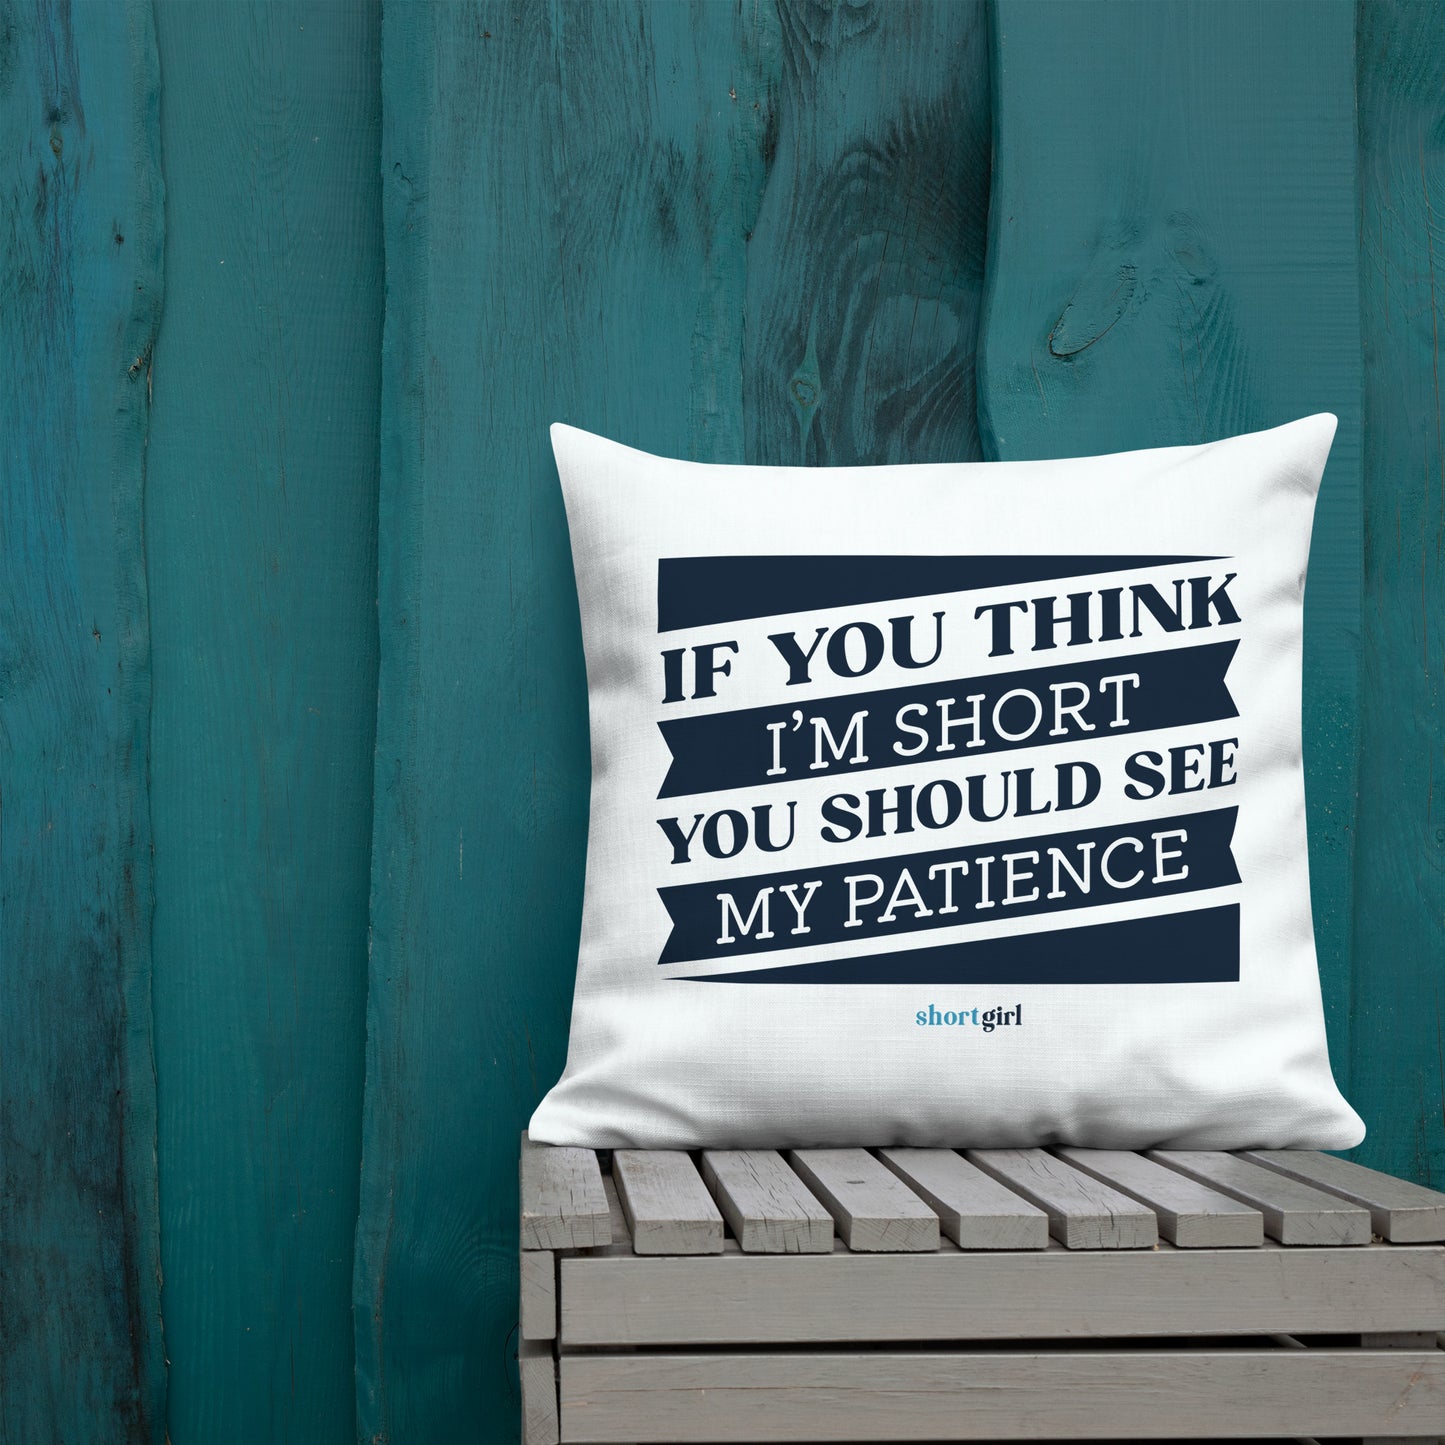 Premium Pillow - If you think I'm short, you should see my patience